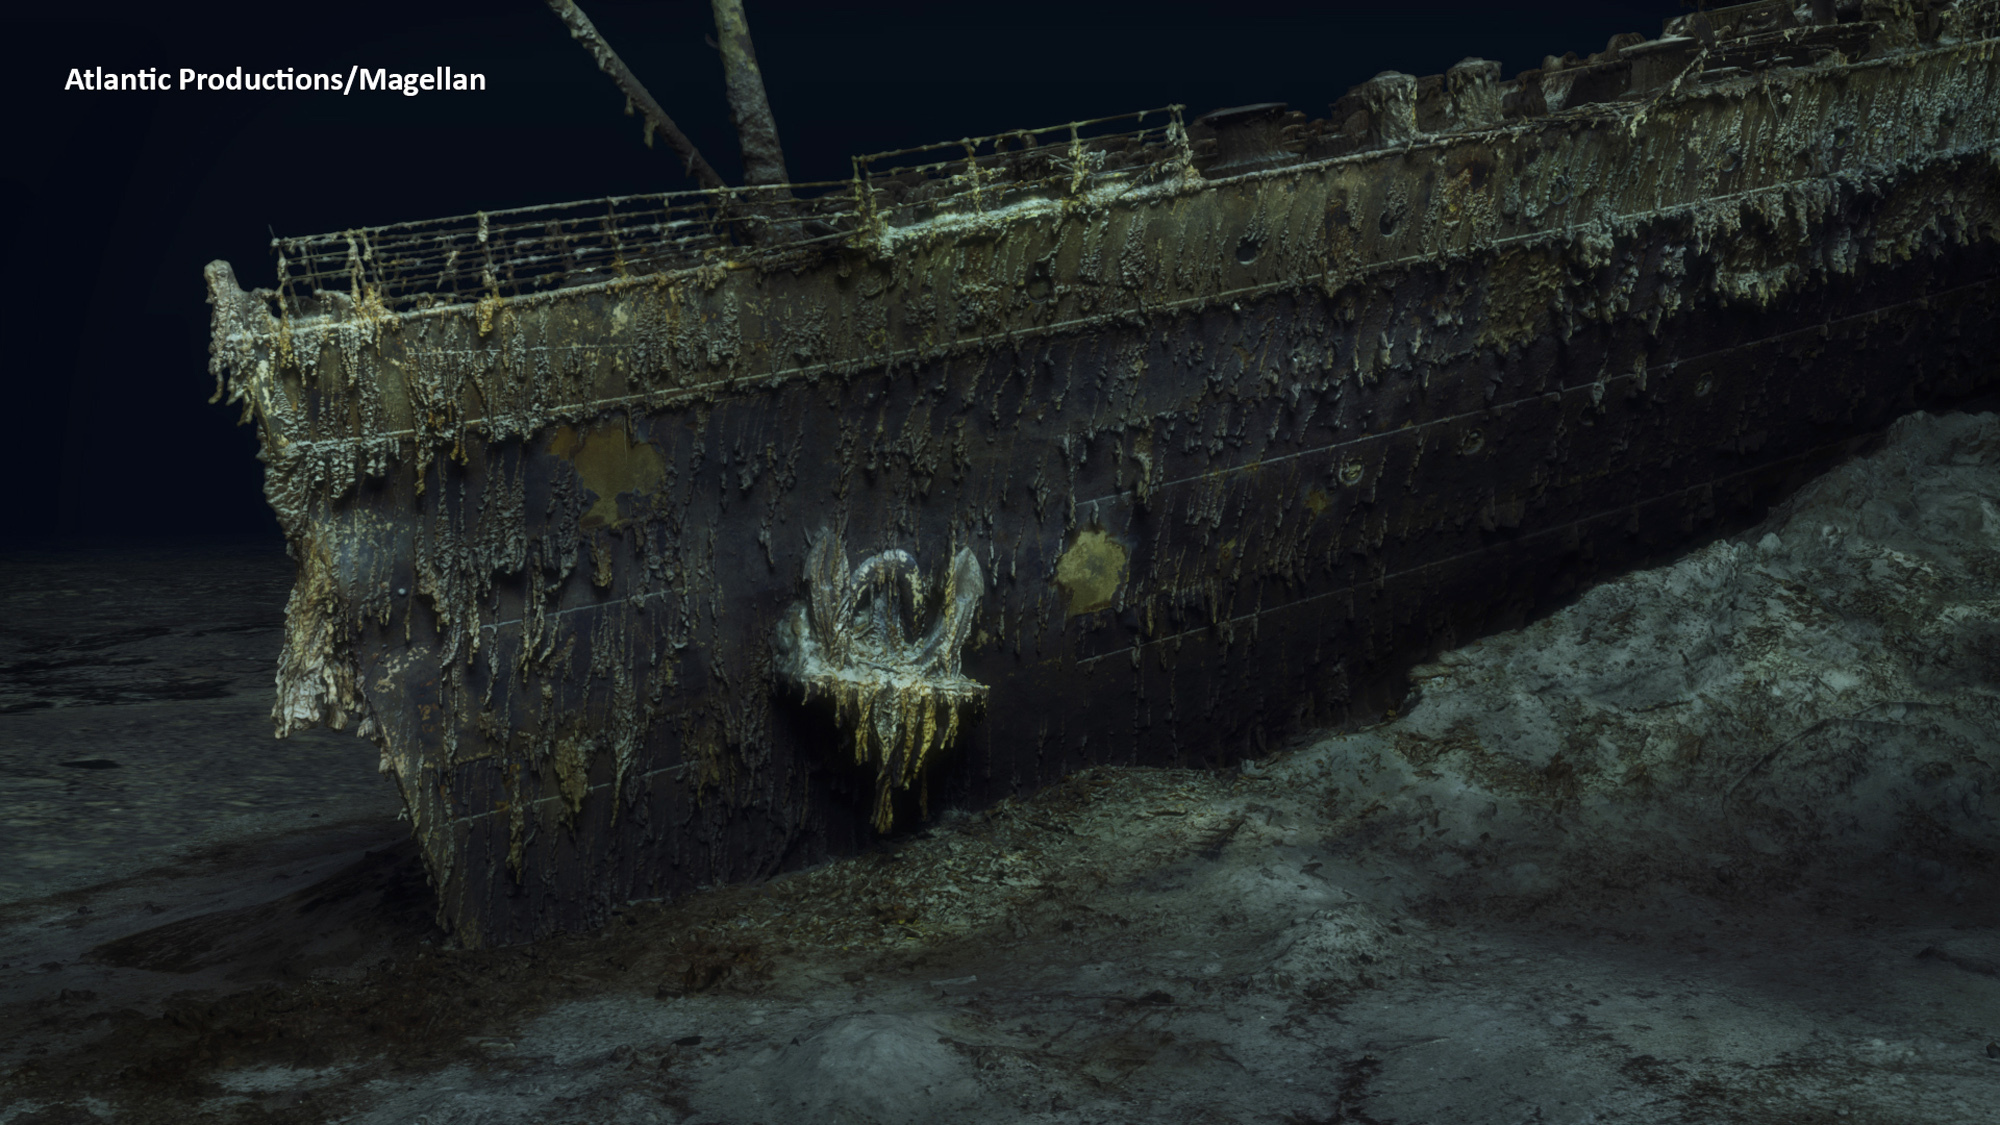 First full-size 3D scan of Titanic shows shipwreck in new light | The Times  of Israel